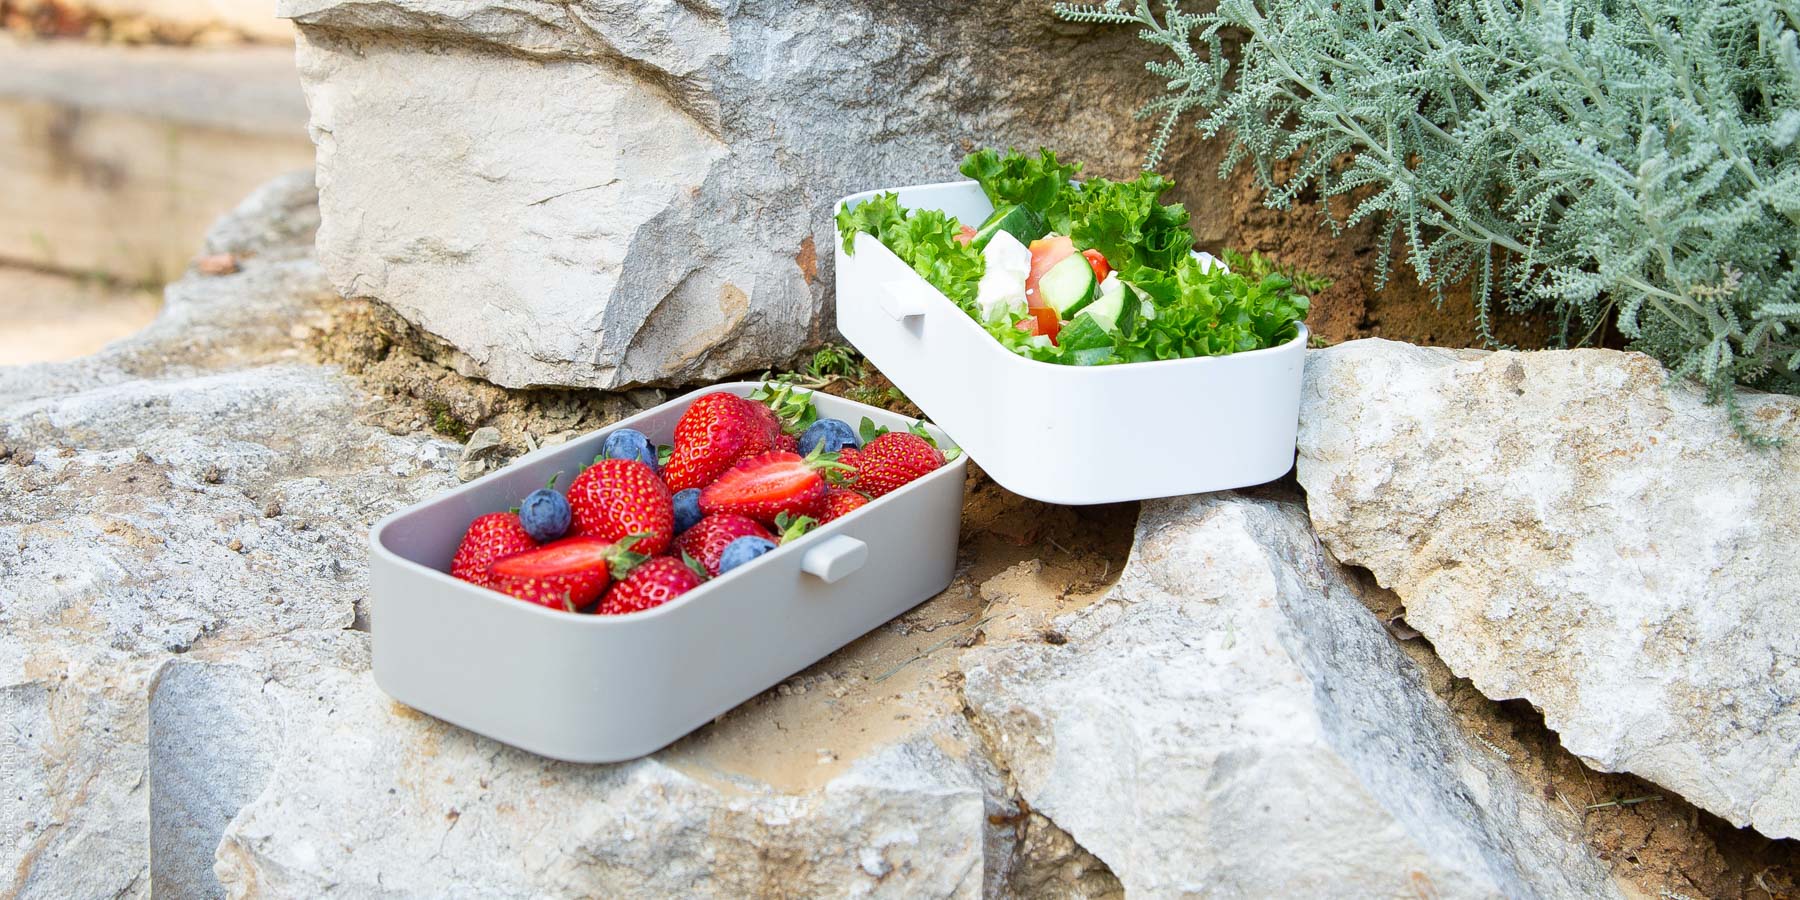 Elegant food photography: eSeasons Bento Lunchbox in Warm Grey with appetizing lunch of strawberries and salad, against rugged quarried stone